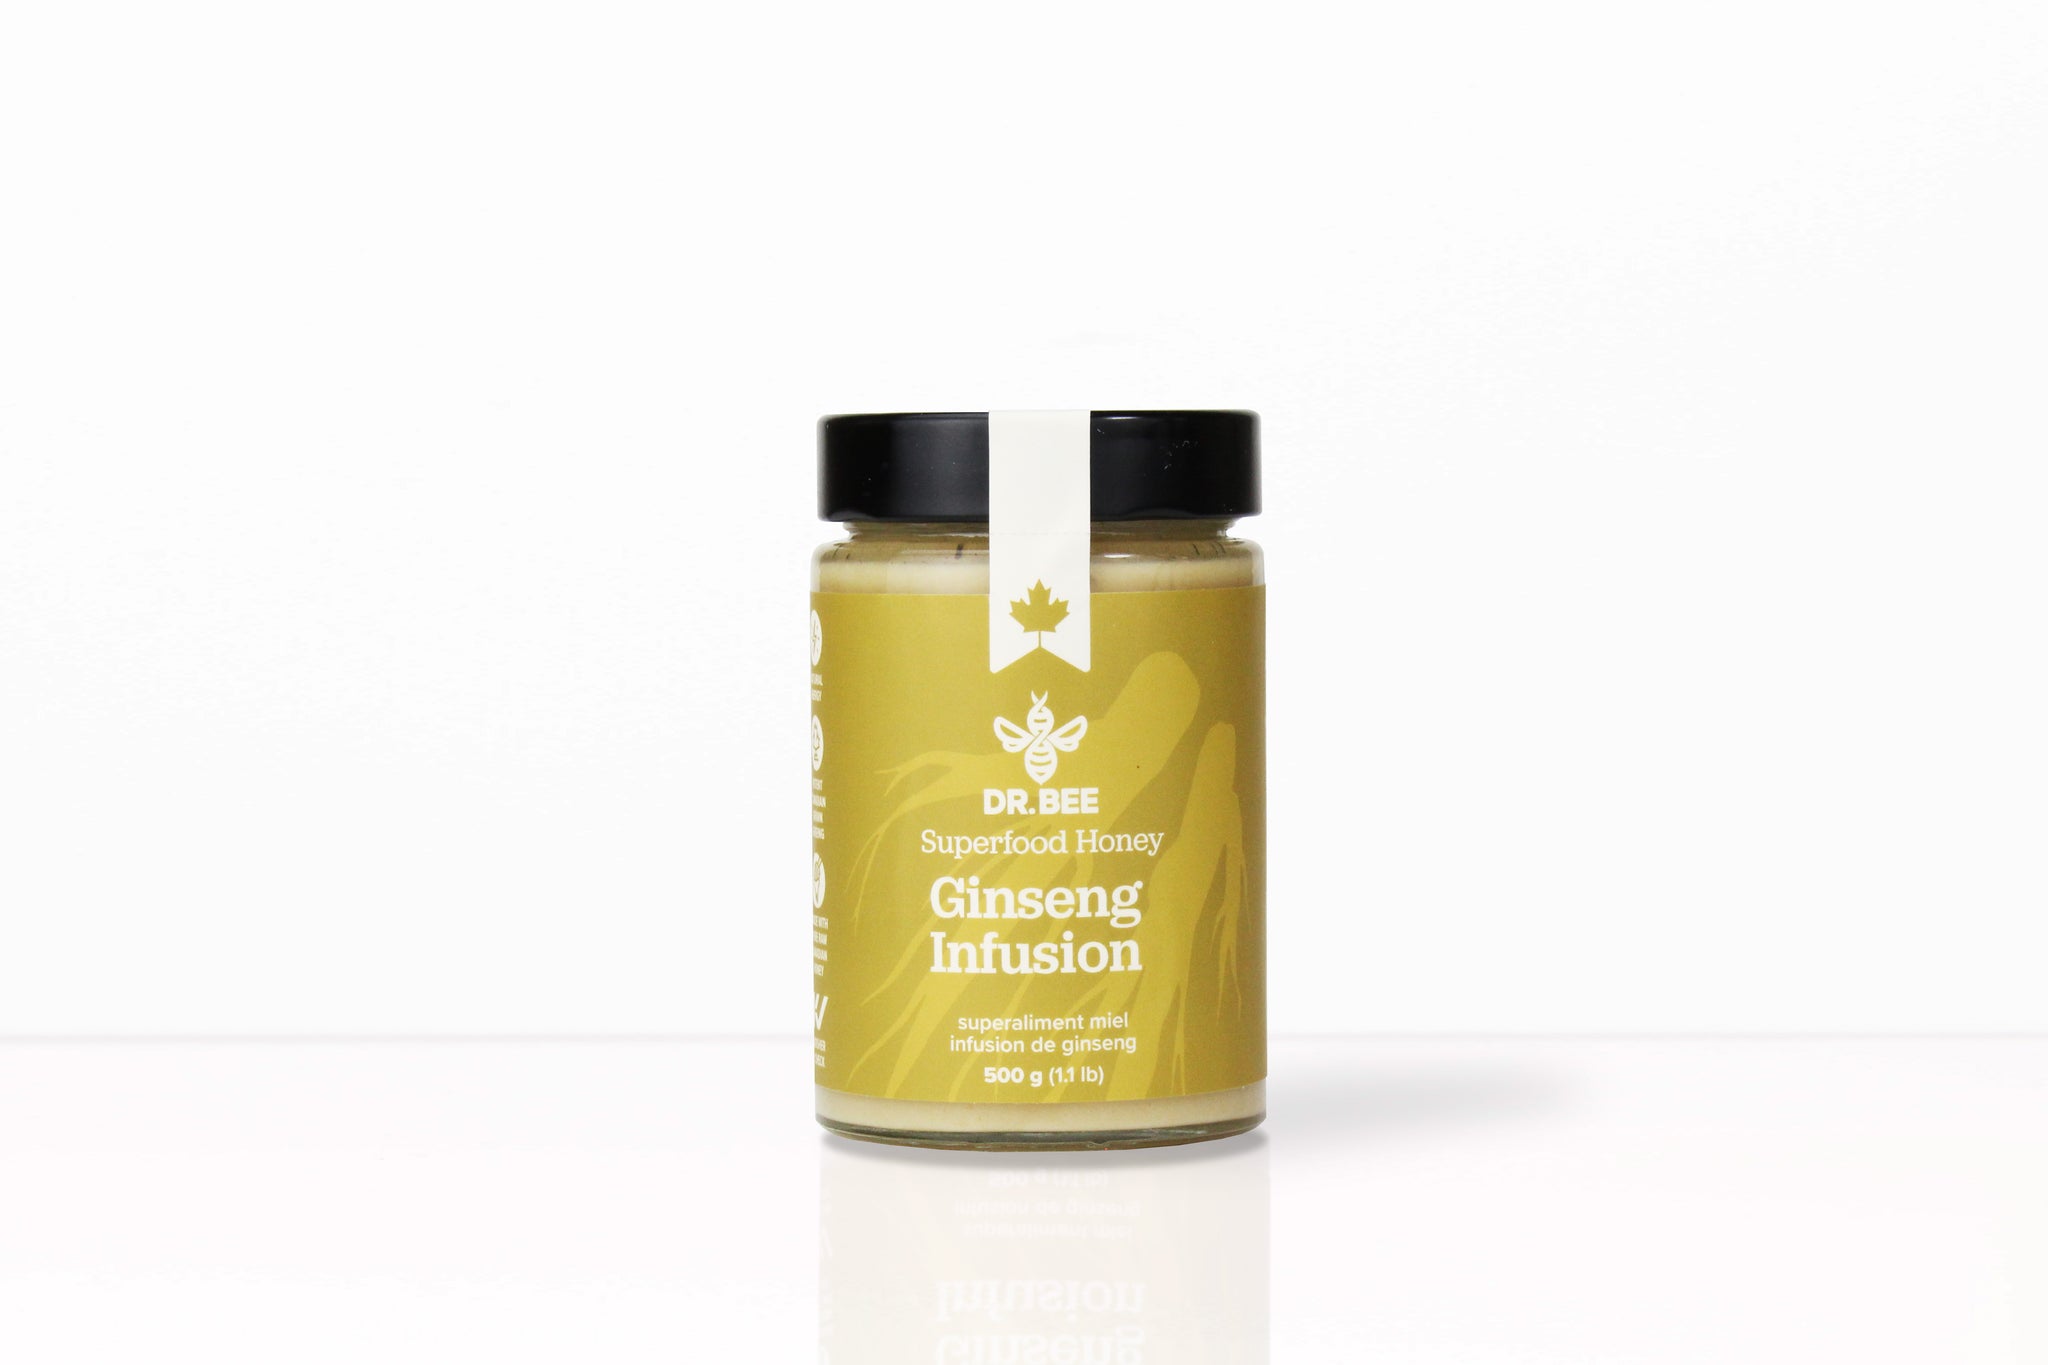 Superfood Honey Ginseng Infusion